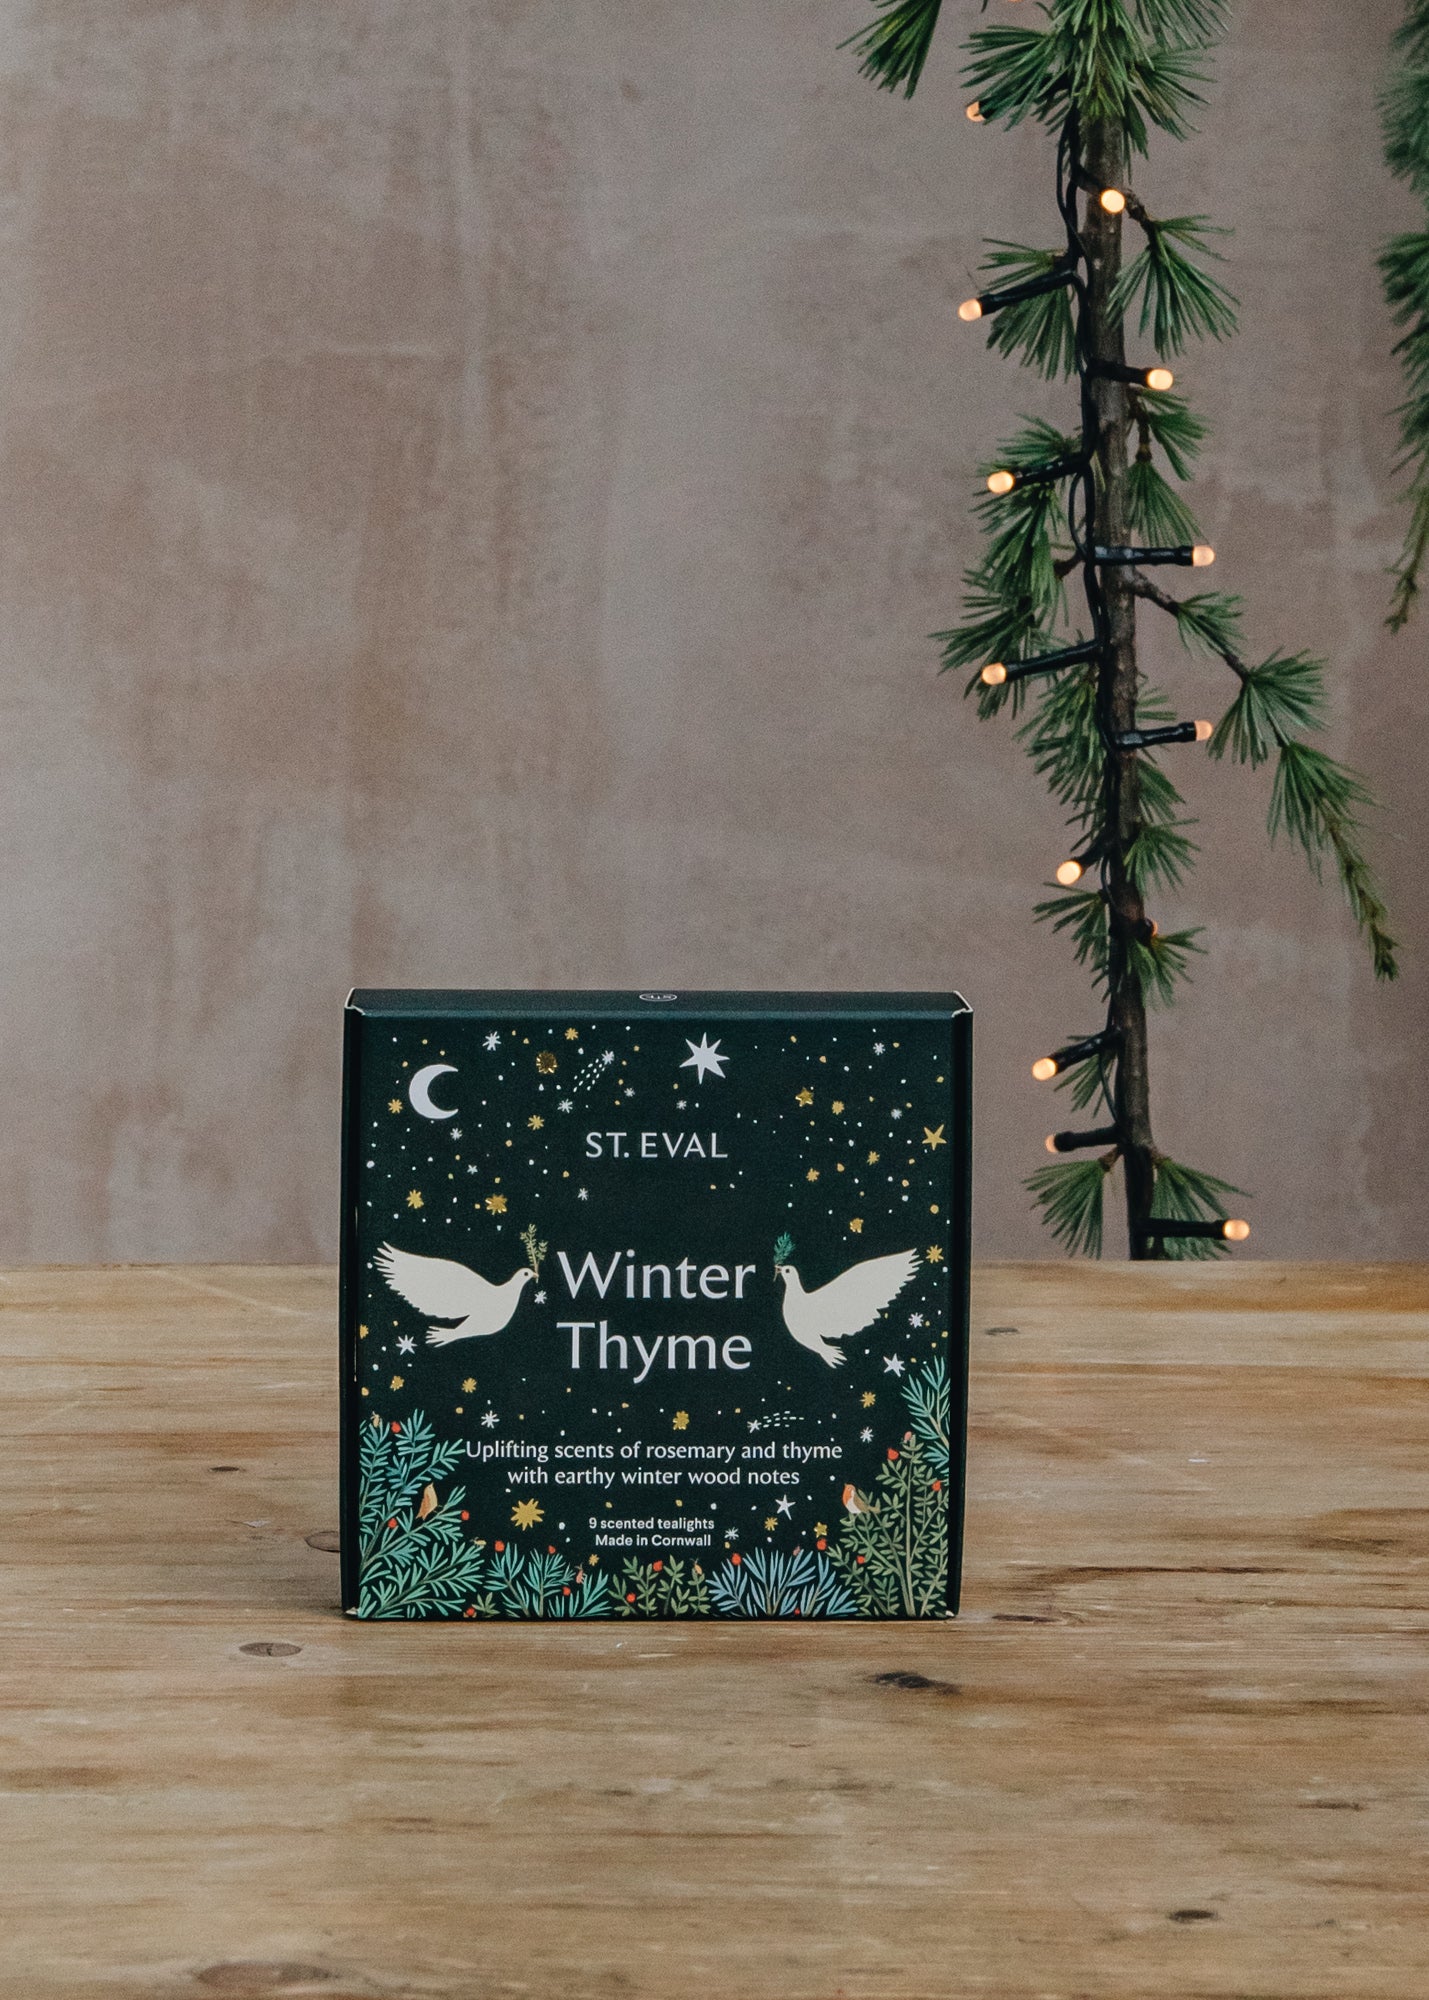 St Eval Scented Tealights in Winter Thyme